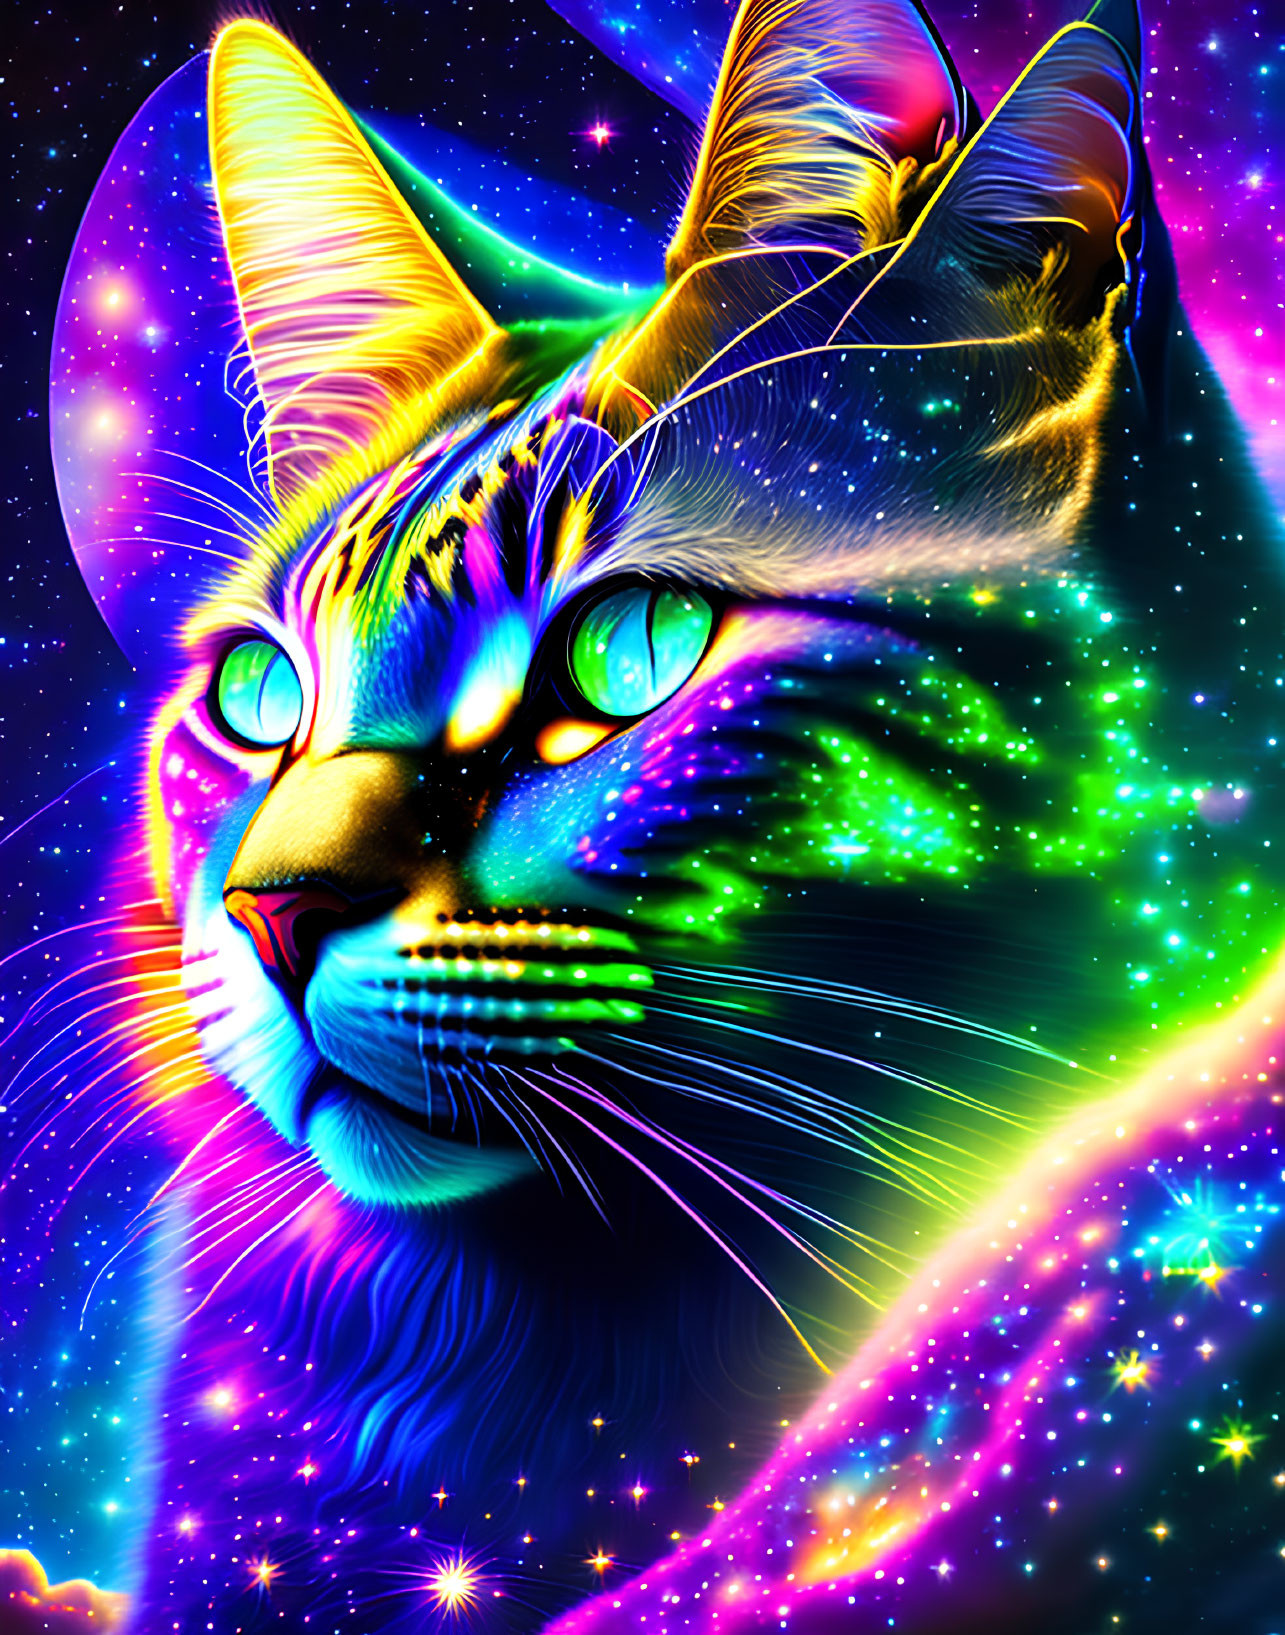 Colorful Cat Face Illustration on Cosmic Space Background